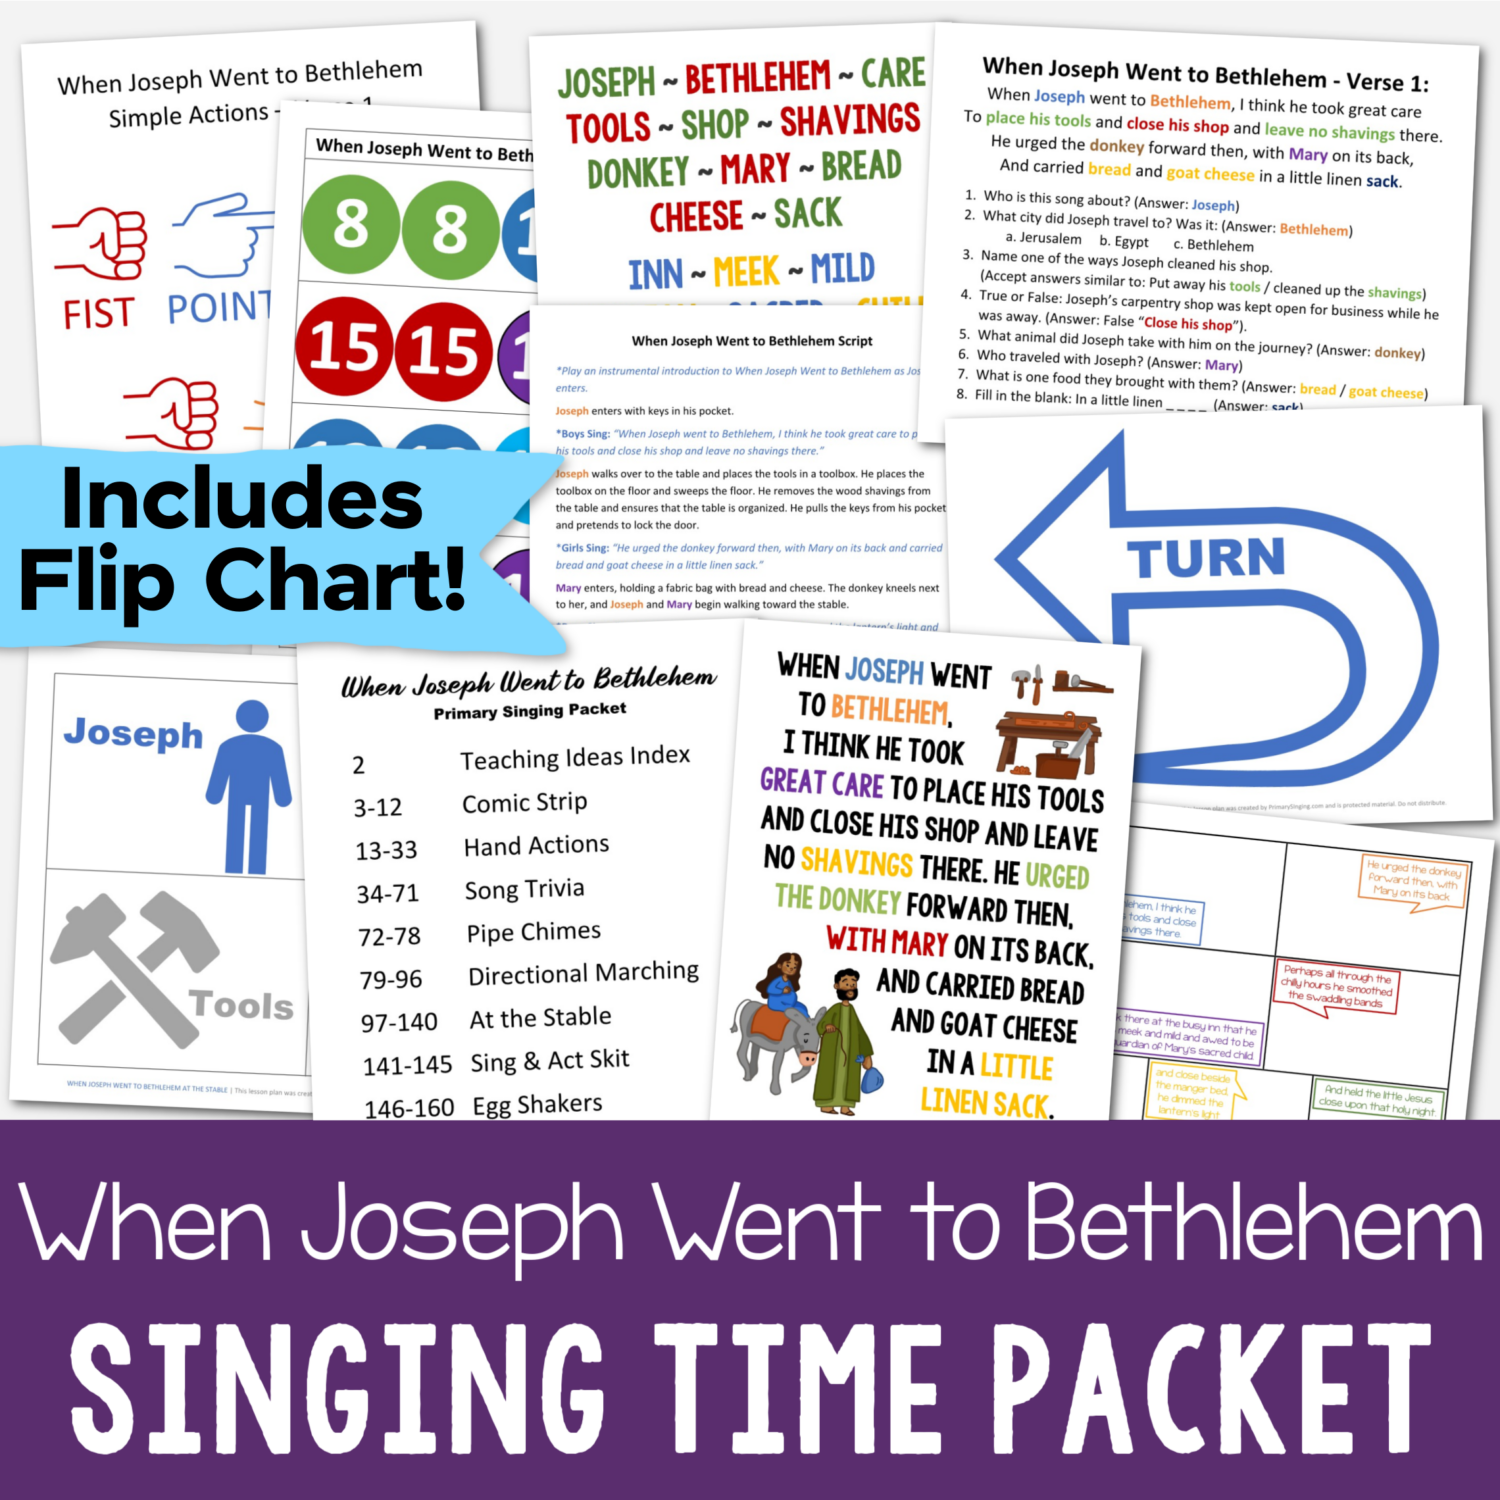 When Joseph Went to Bethlehem singing time packet filled with fun ways to teach this song for LDS Primary music leaders including a custom art flip chart, comic strip, egg shakers, hand actions, directional marching, pipe chimes, song trivia and more!